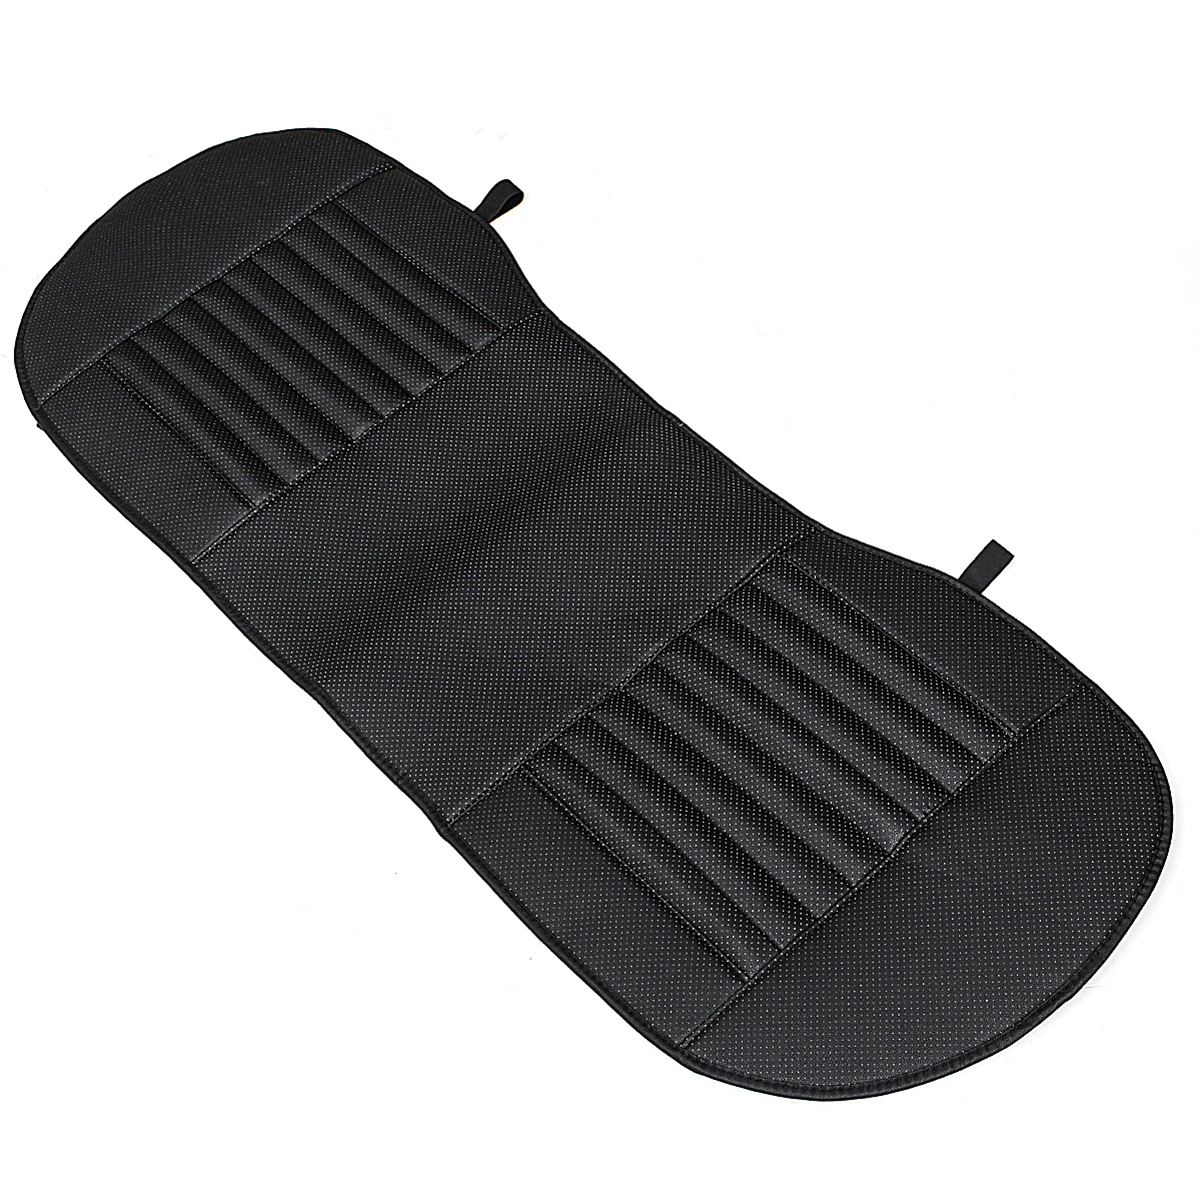 138X49cm PU Leather Car Rear Seat Covers Universal Seat Protector Seat Cushion Pad Mat